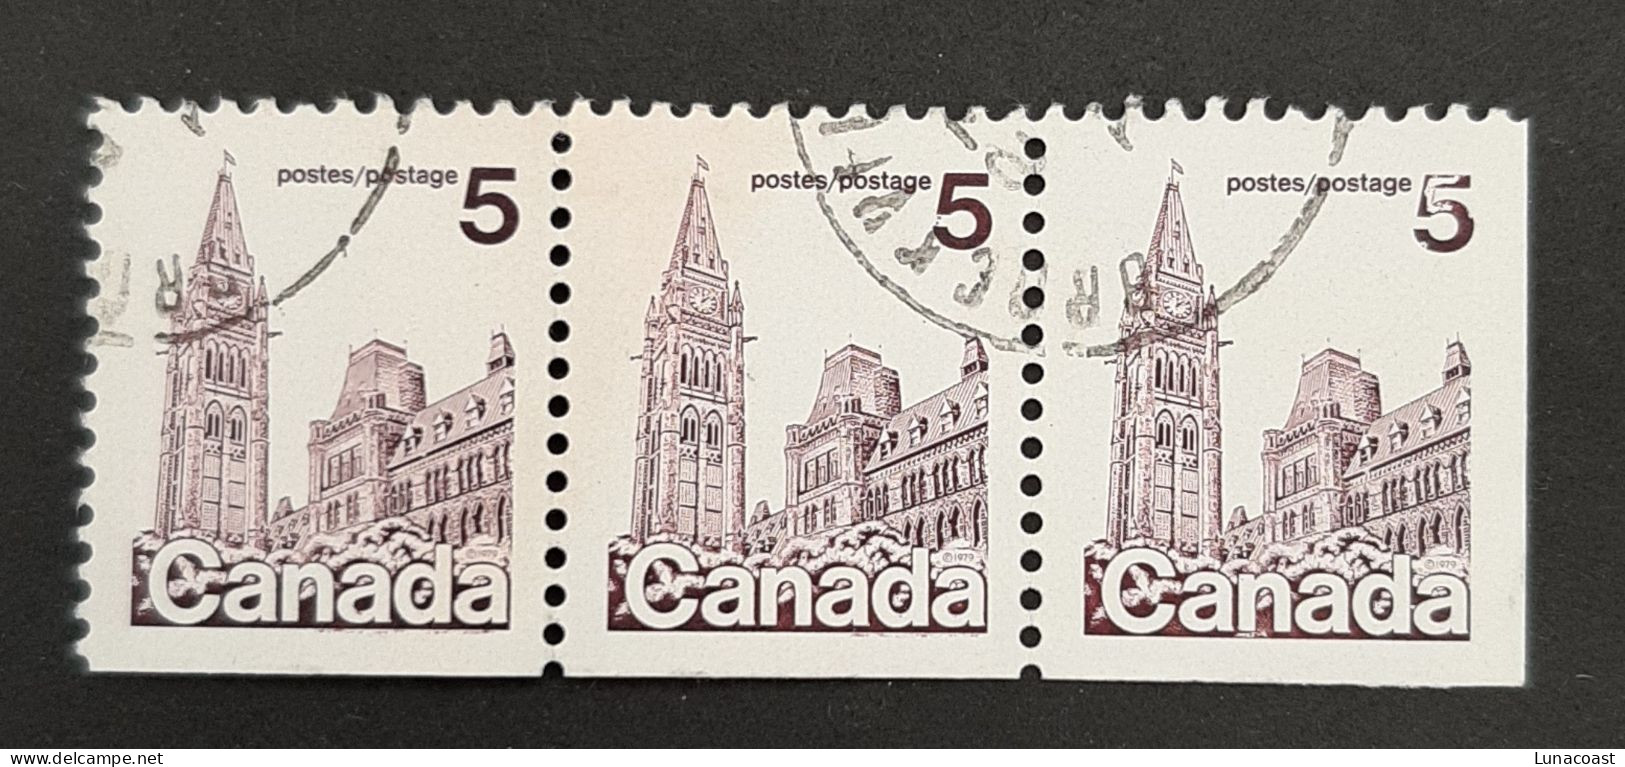 Canada 1979  USED  Sc797a,  3 X 5c Booklet Stamps, Parliament - Used Stamps